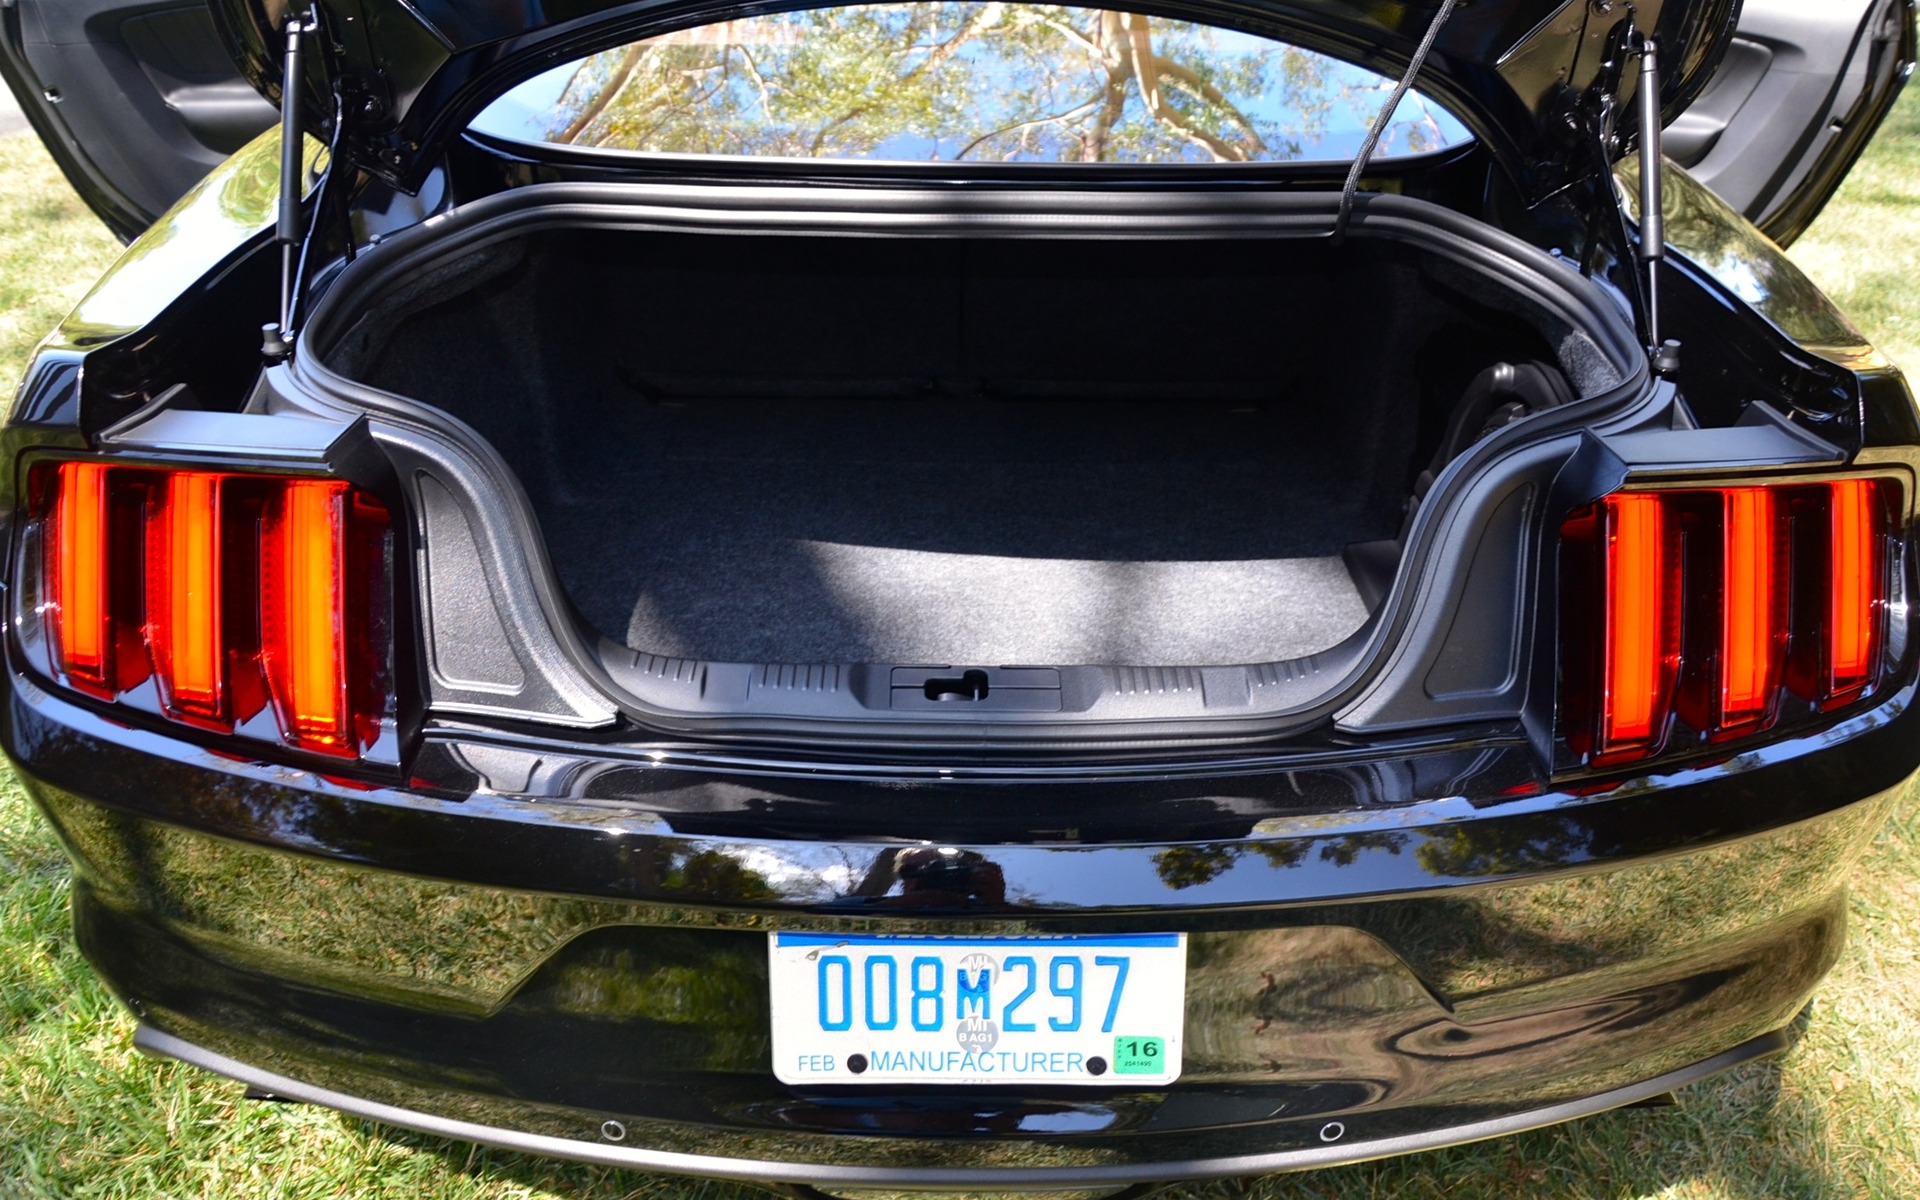 2015 Ford Mustang Coupe - Larger and lower trunk opening